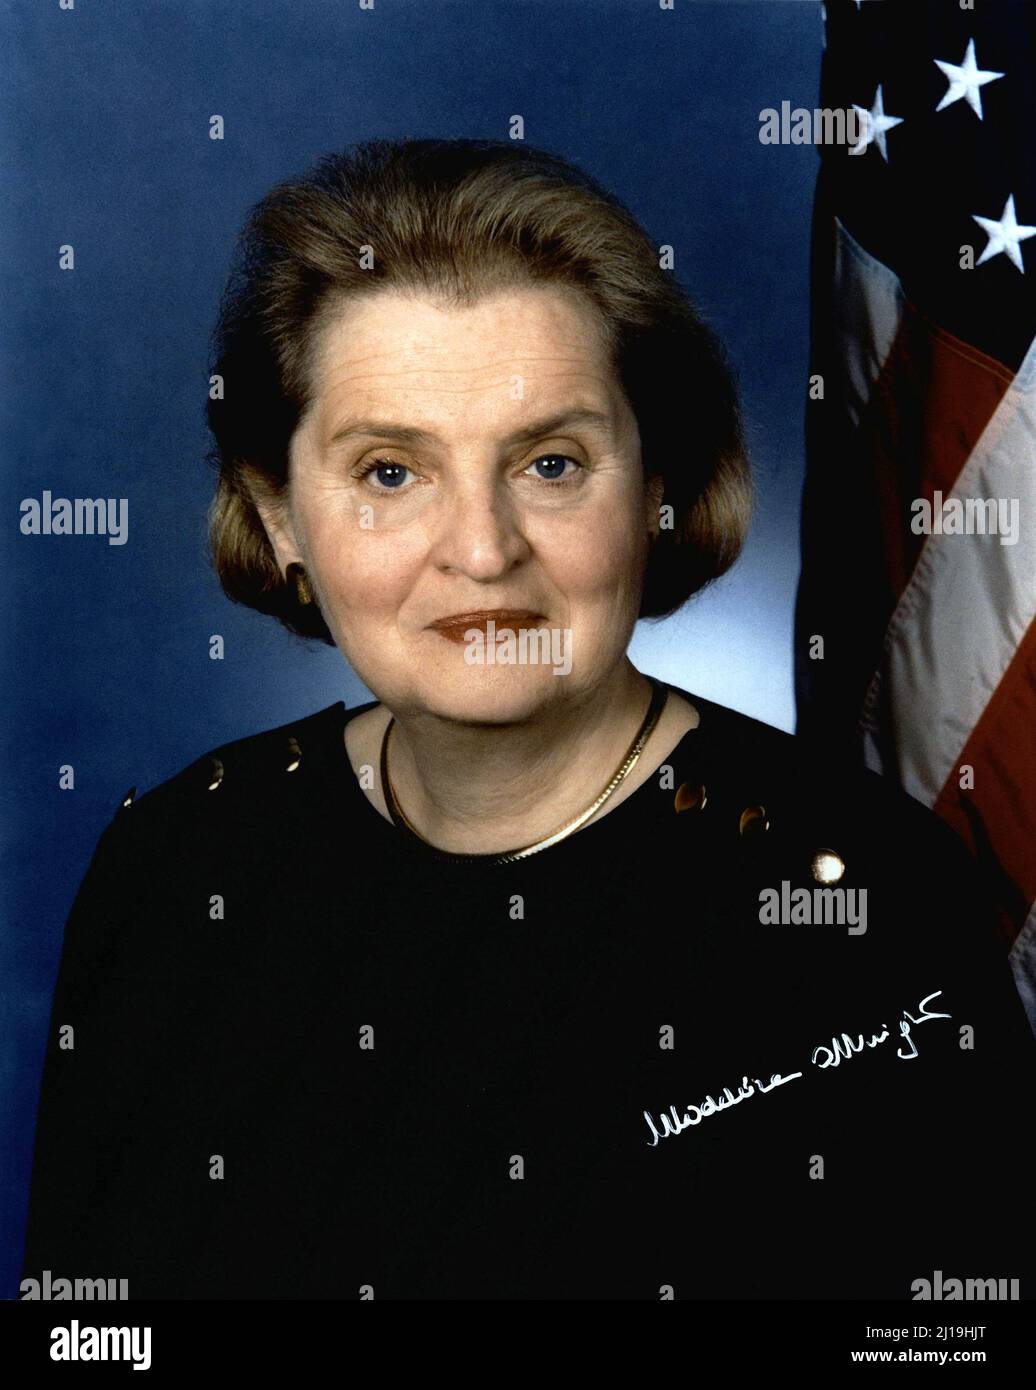 1994 ca ,  Washington , USA : The american politician MADELEINE Korbel ALBRIGHT ( Marie Jana Korbelova , 1937 - 2022 ), was an American diplomat who served as the 64th United States Secretary of State from 1997 to 2001 under President Bill Clinton . She was the first female secretary of state in U.S. history.  In this photo the official portrait by Official Staff photographer of White House for United States Department of State . -  Segratario di stato donna alla Presidenza degli Stati Uniti d'America -  STATI UNITI AMERICA - POLITICO -  DONNA POLITICA - POLITIC  --- Archivio GBB Stock Photo